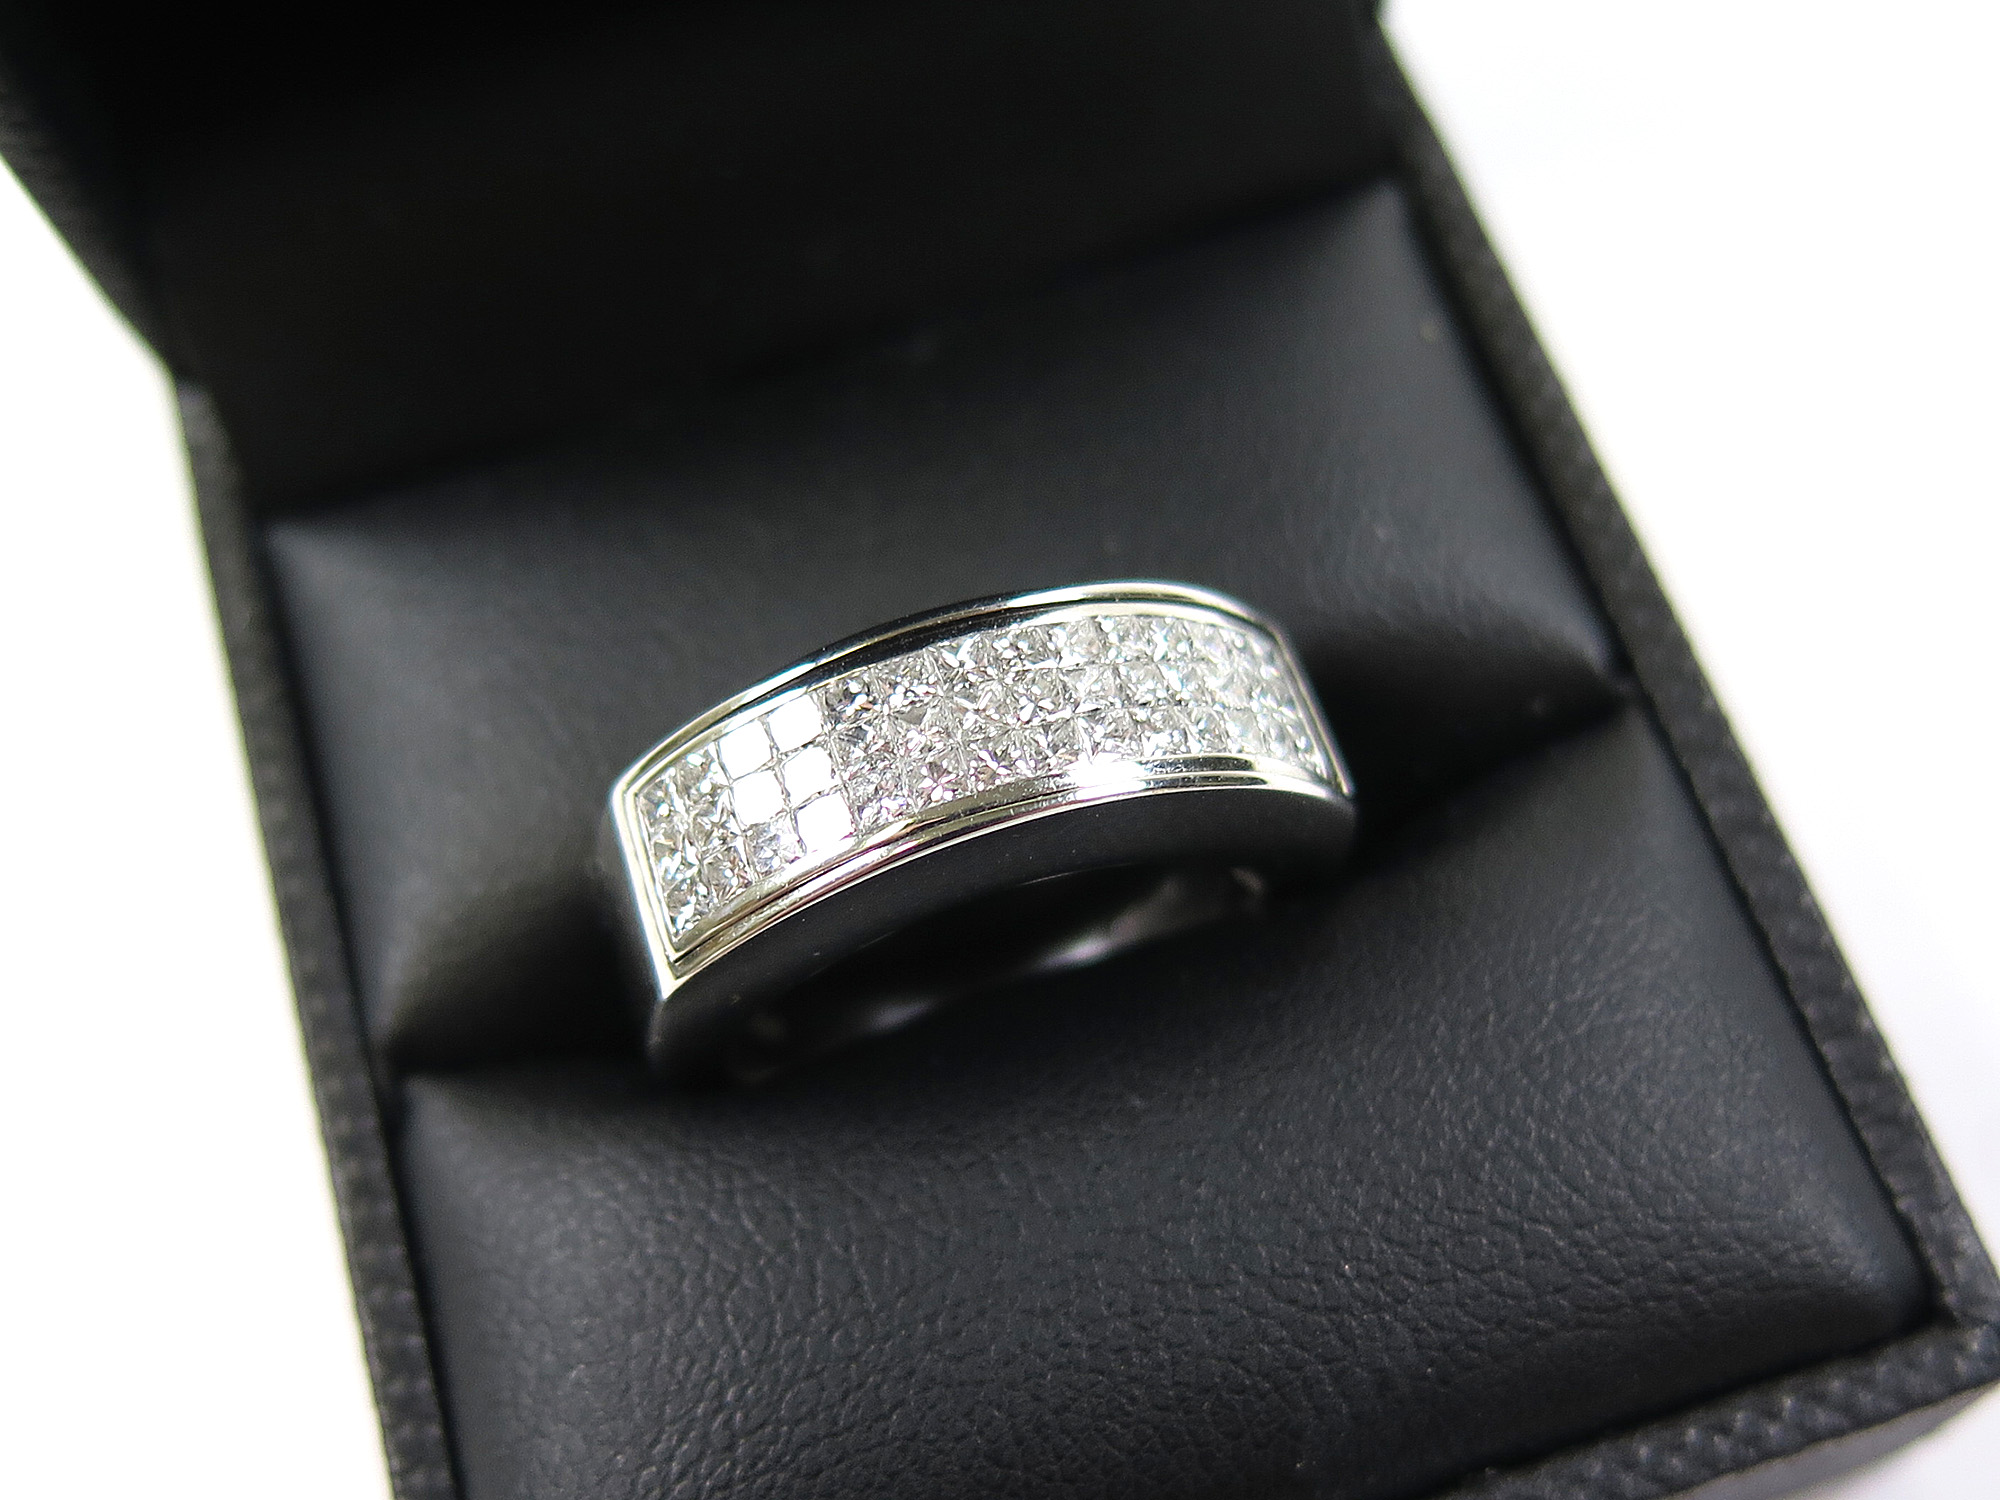 18ct White Gold Ring set with 3 rows of Diamonds approx 1.90 carat weight size M weight 11.0 grams